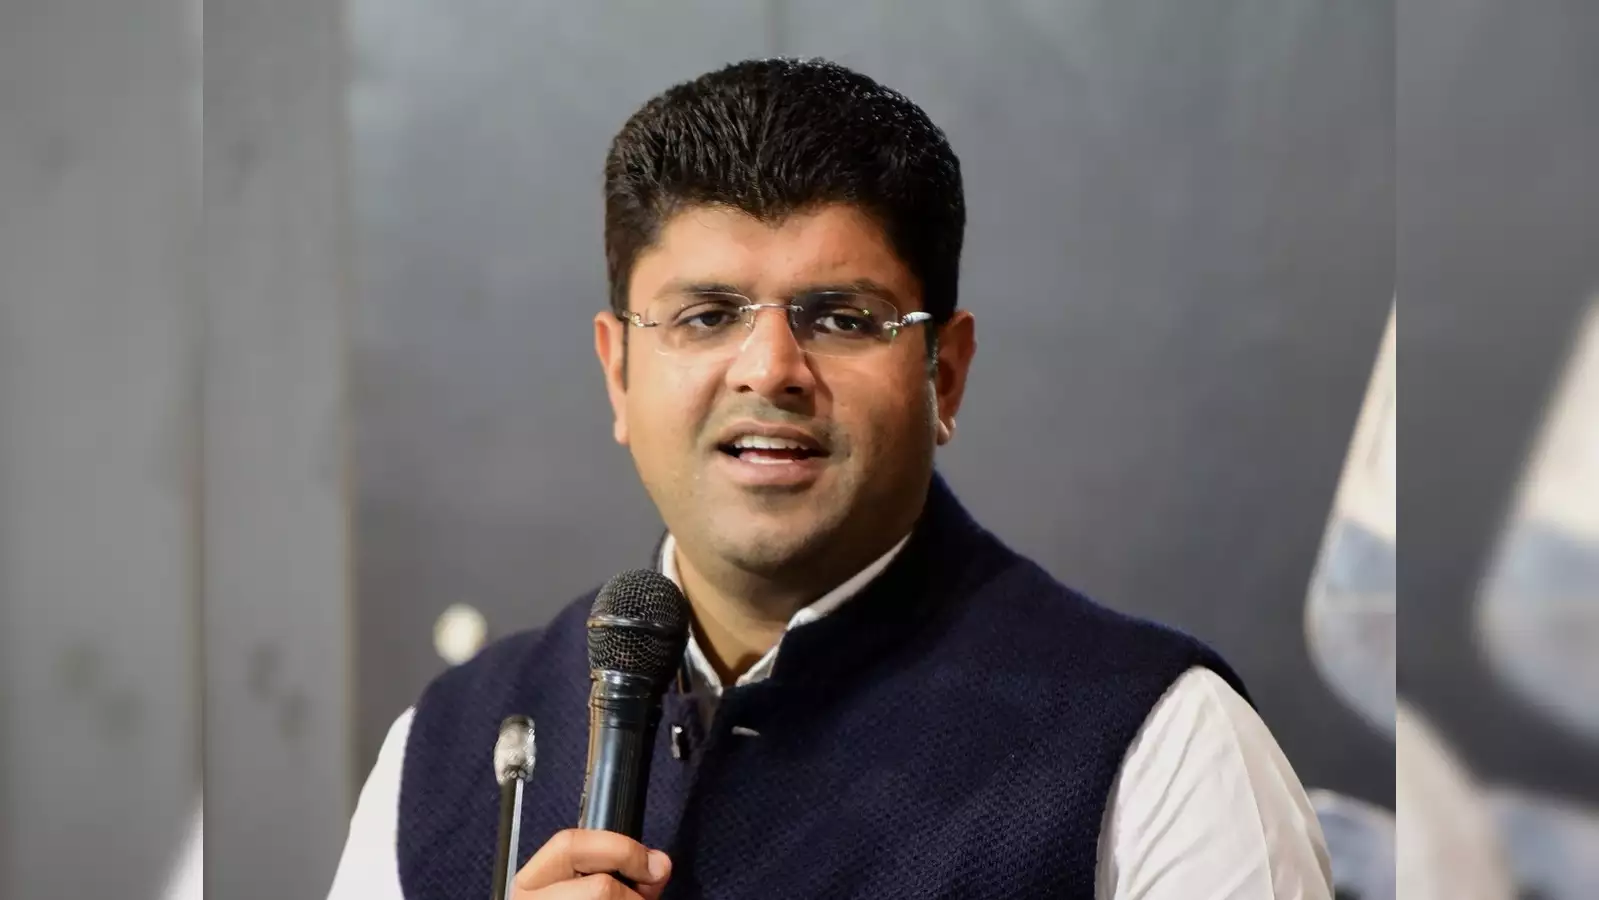 Dushyant Chautala Signals Support for Congress Amid Haryana Government Turmoil